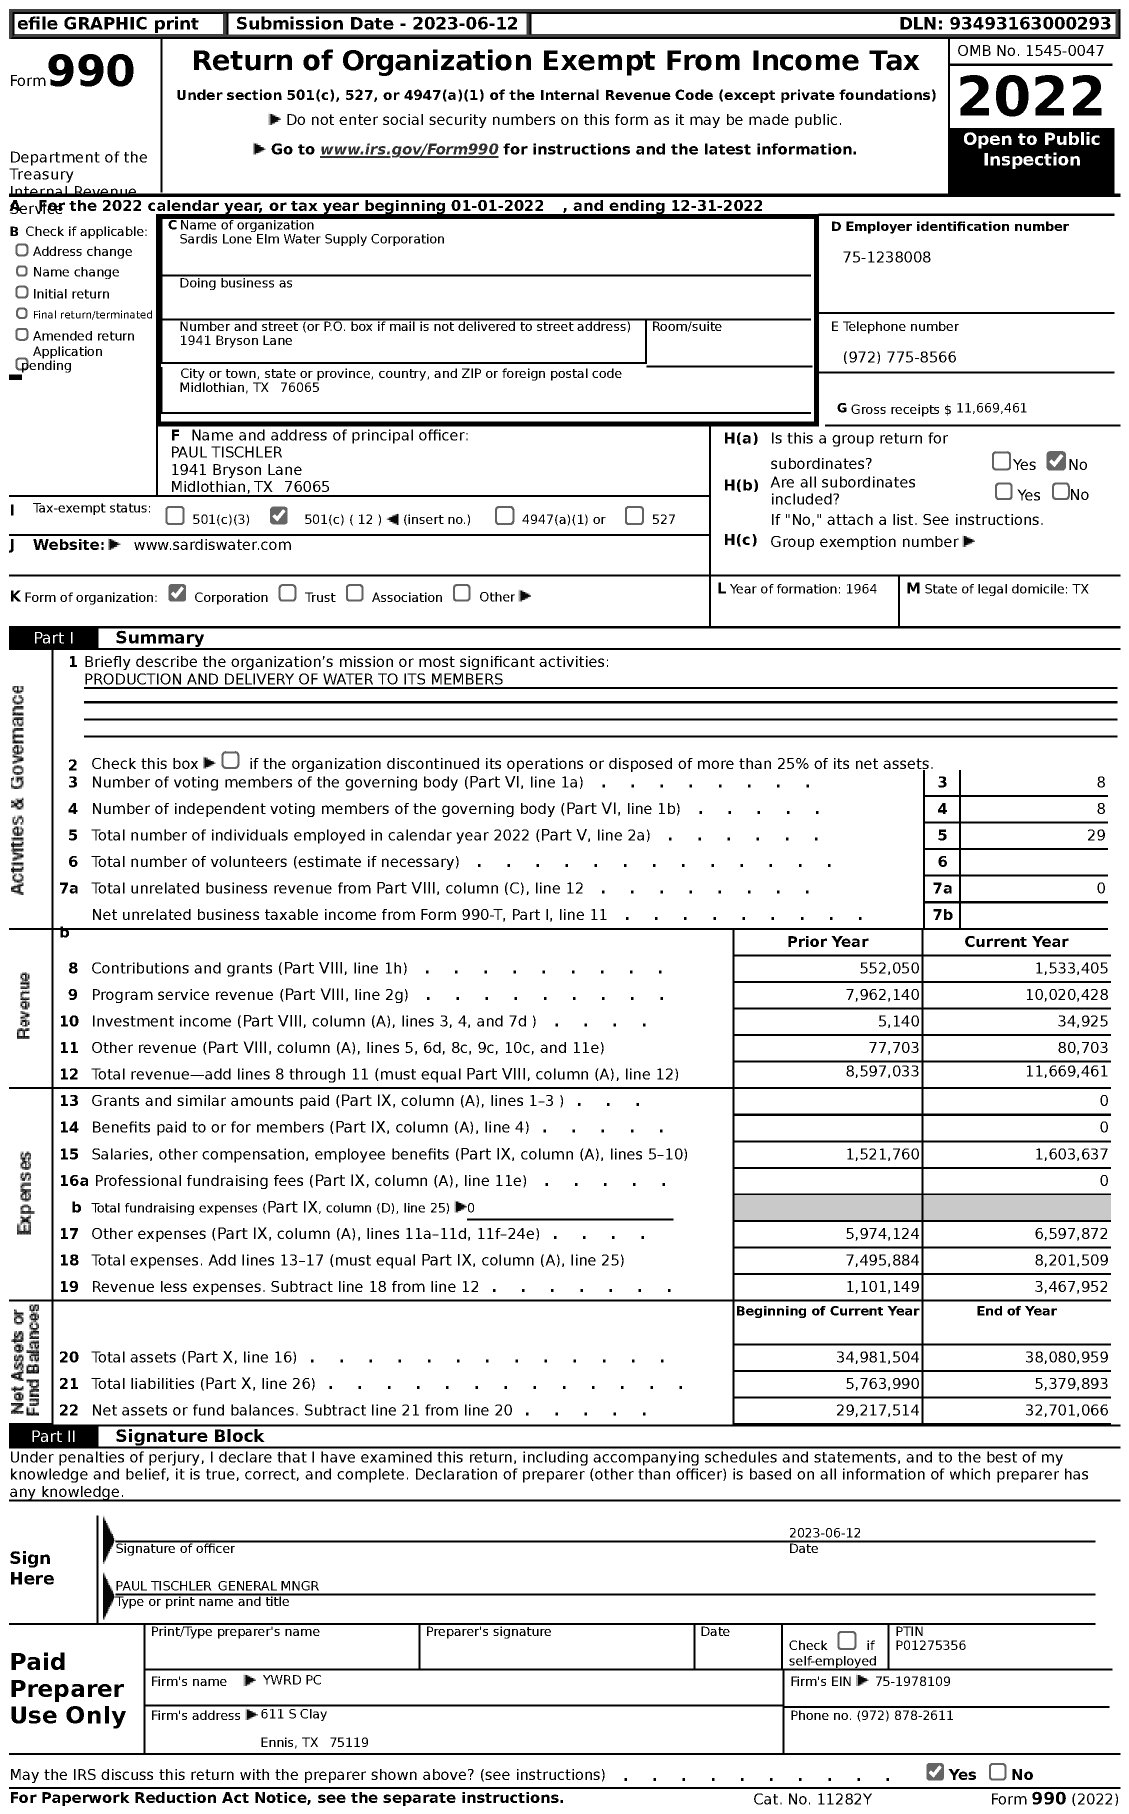 Image of first page of 2022 Form 990 for Sardis Lone Elm Water Supply Corporation